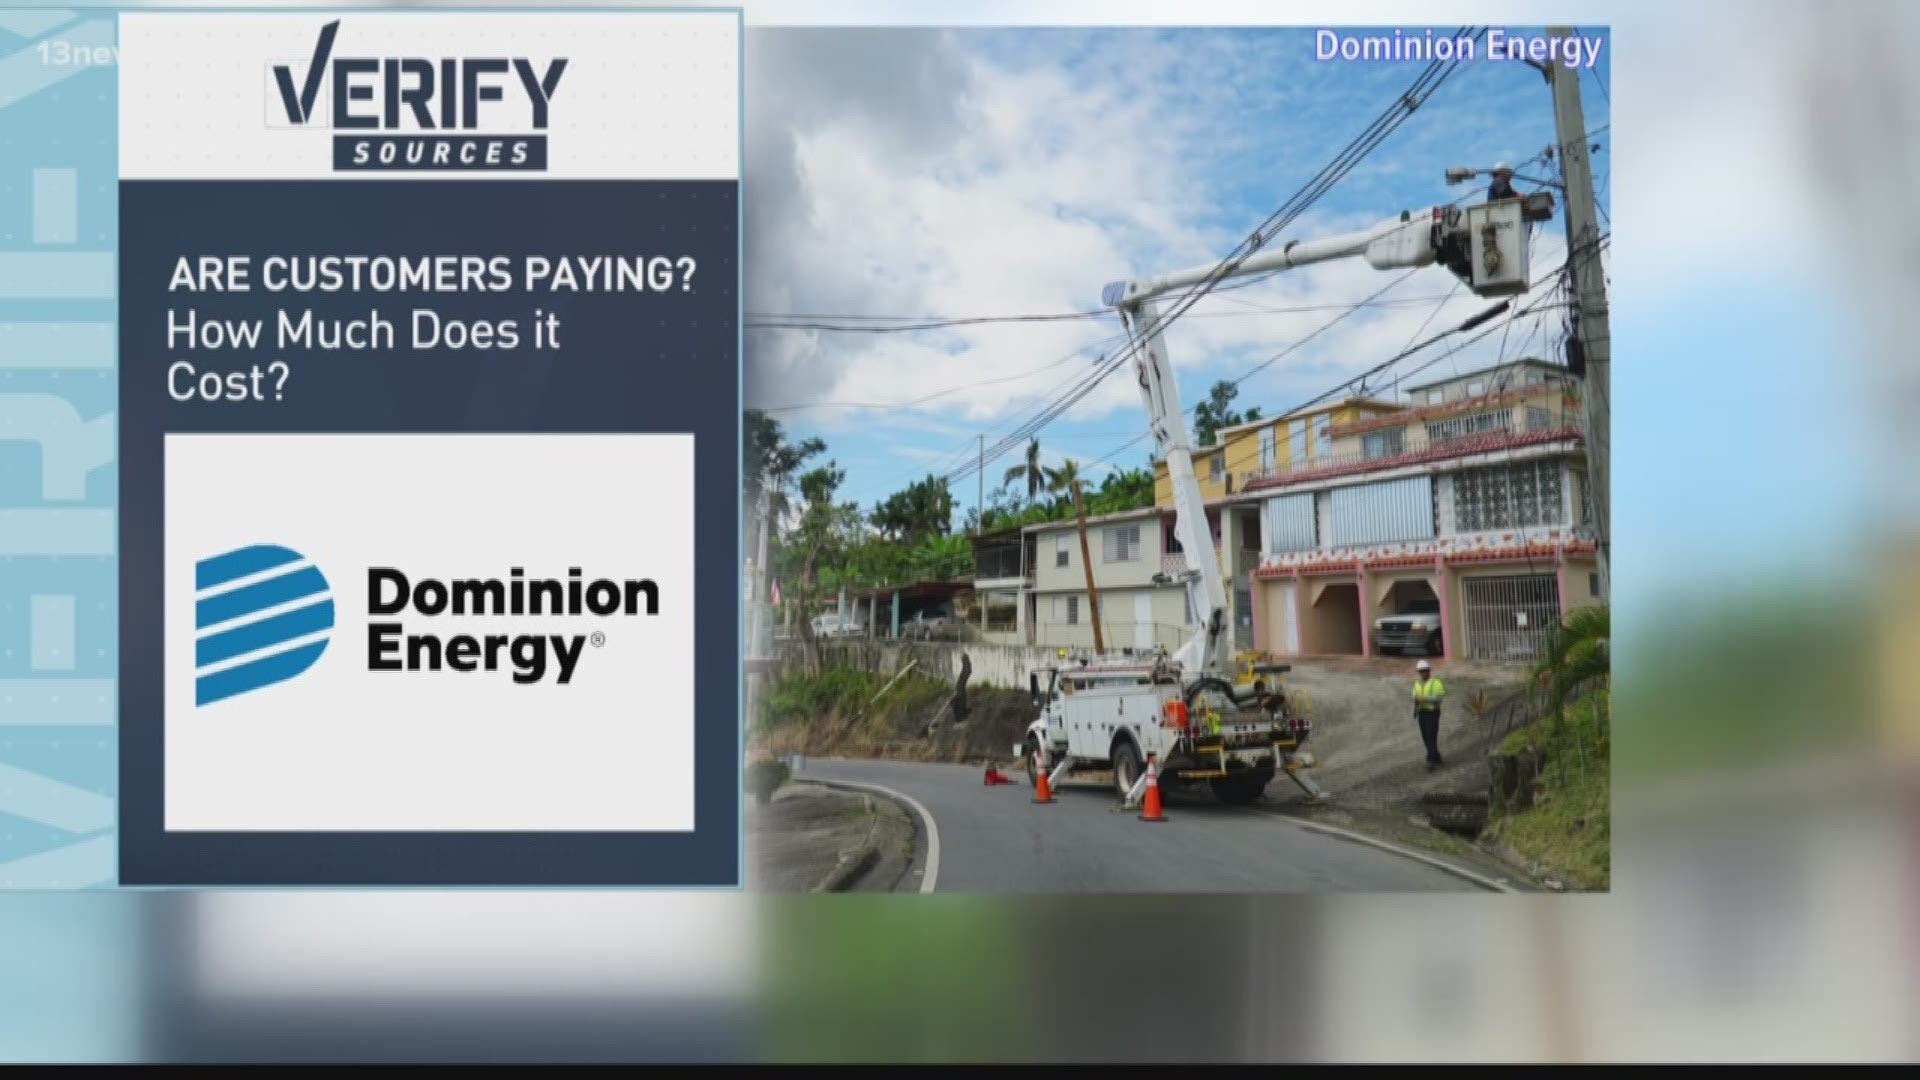 Who is footing the bill for Dominion Energy's hurricane relief efforts in Puerto Rico?